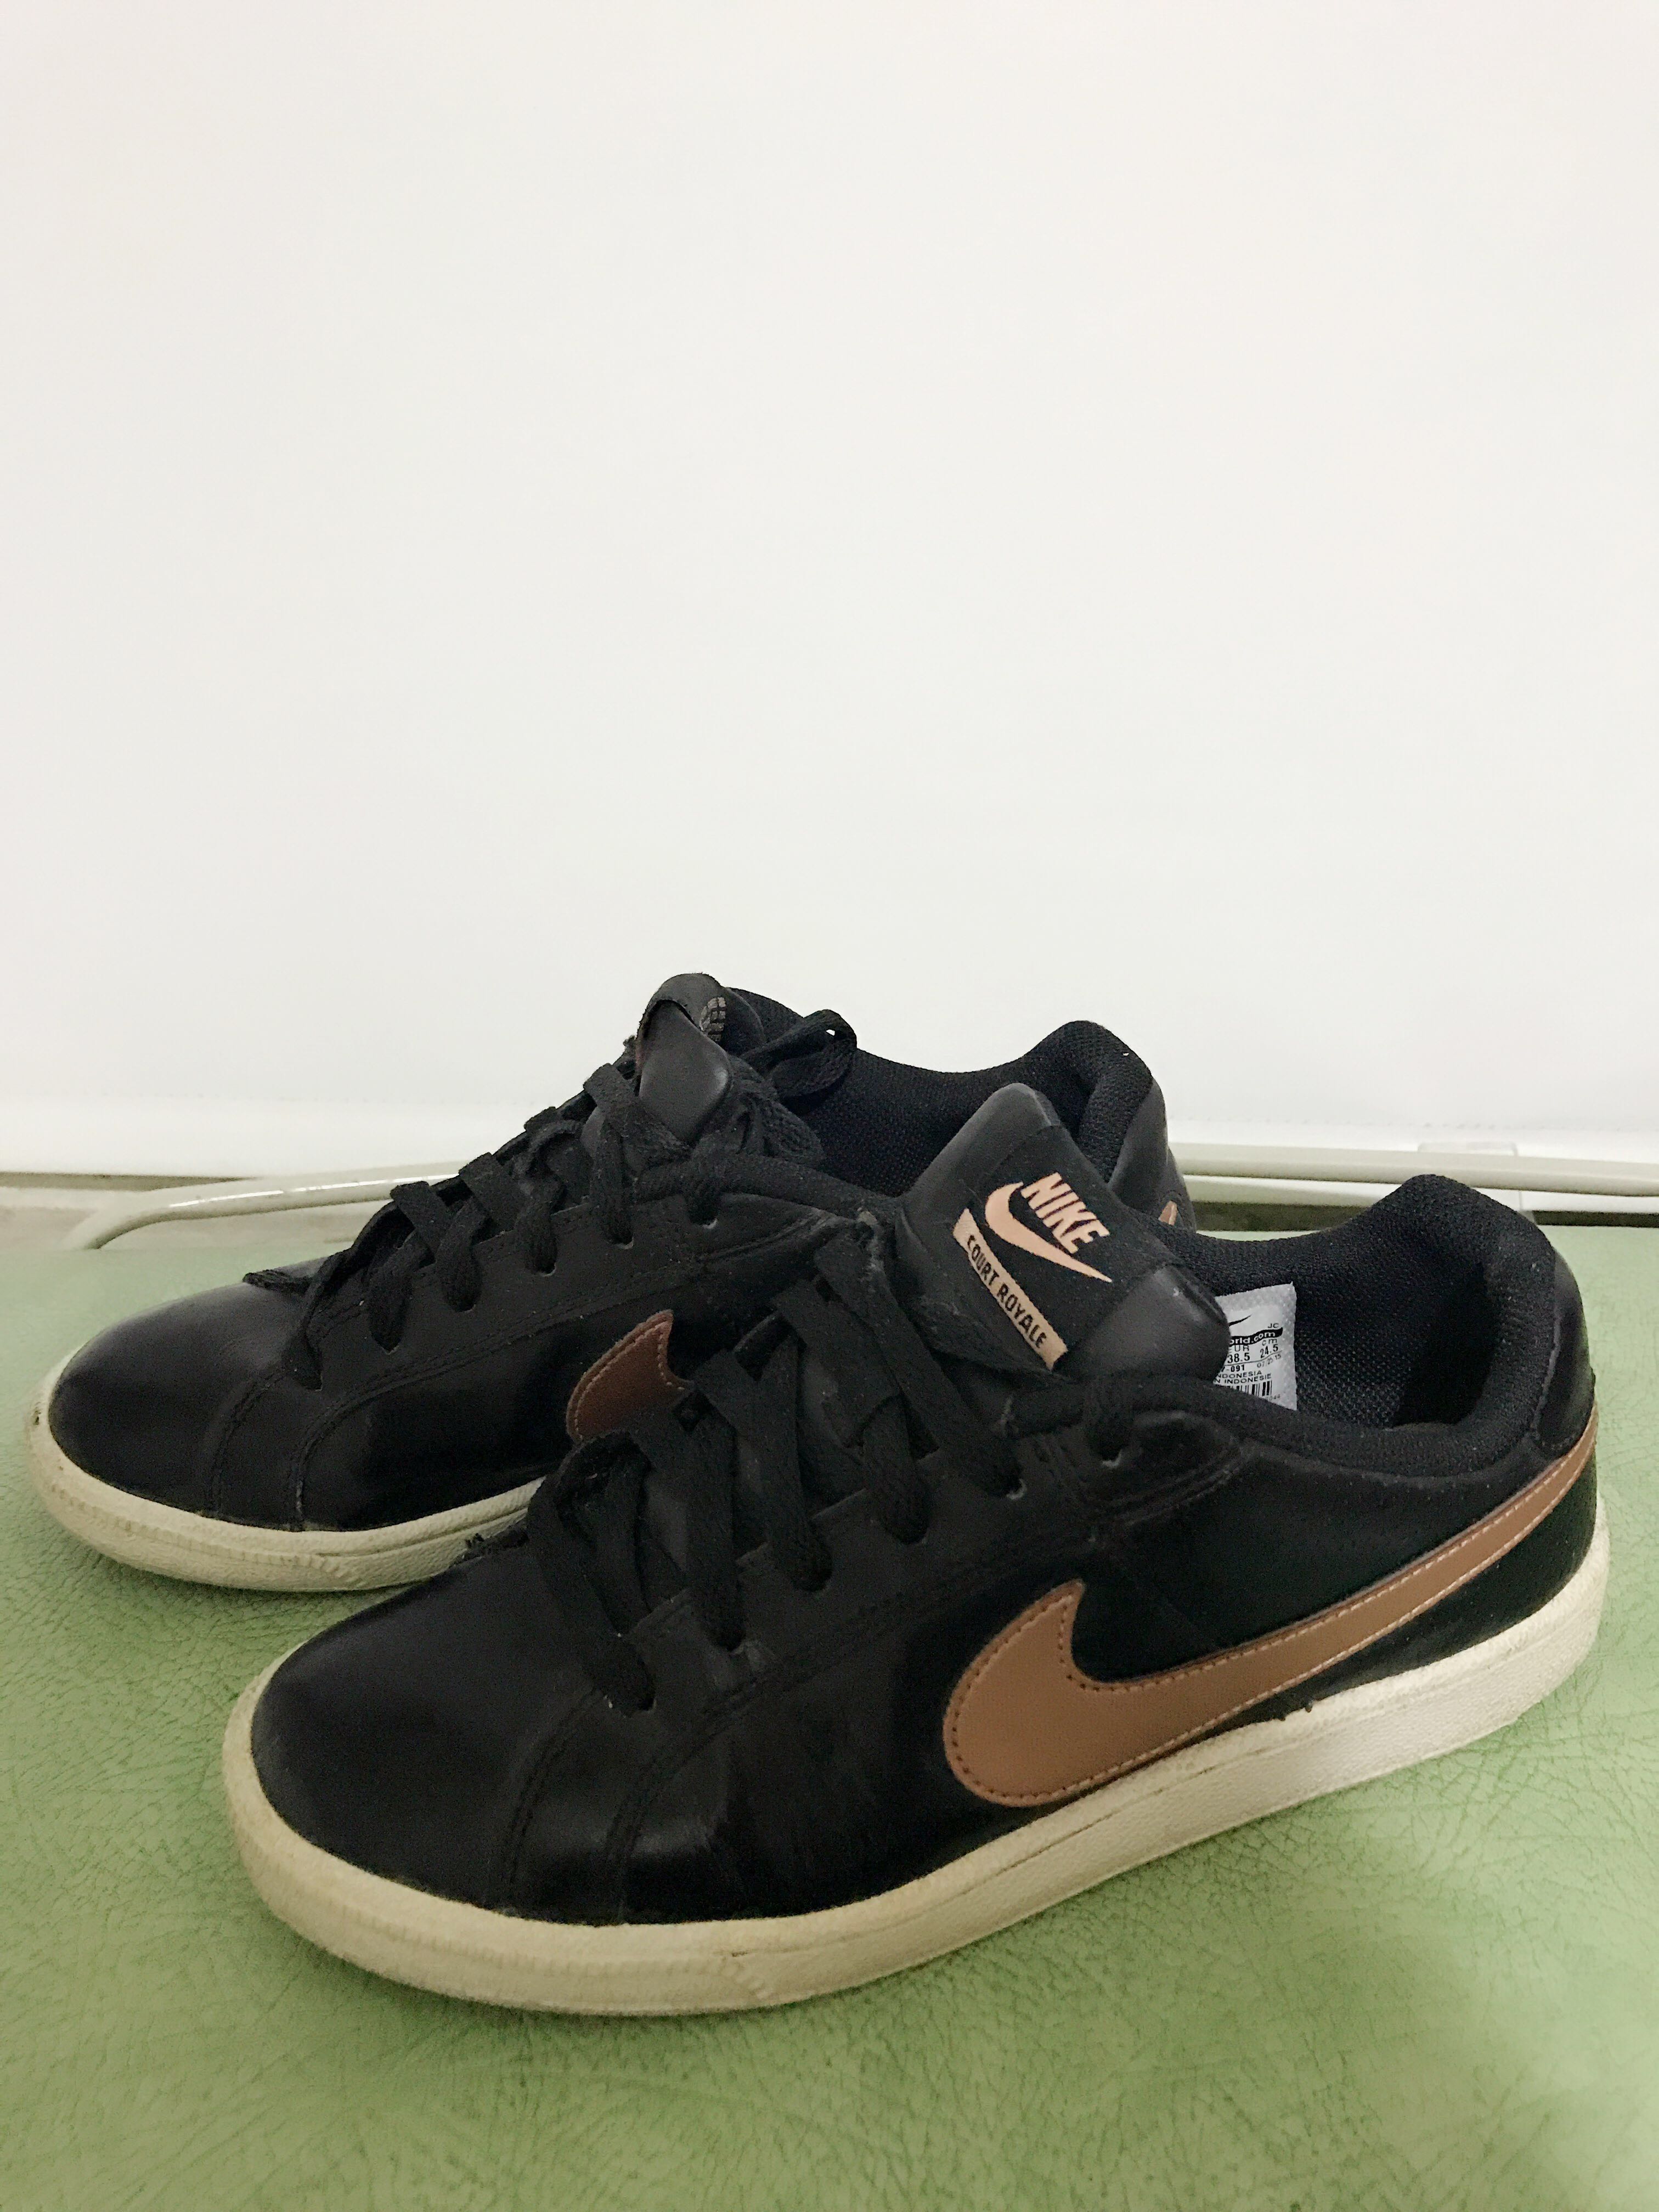 black nike shoes with gold tick